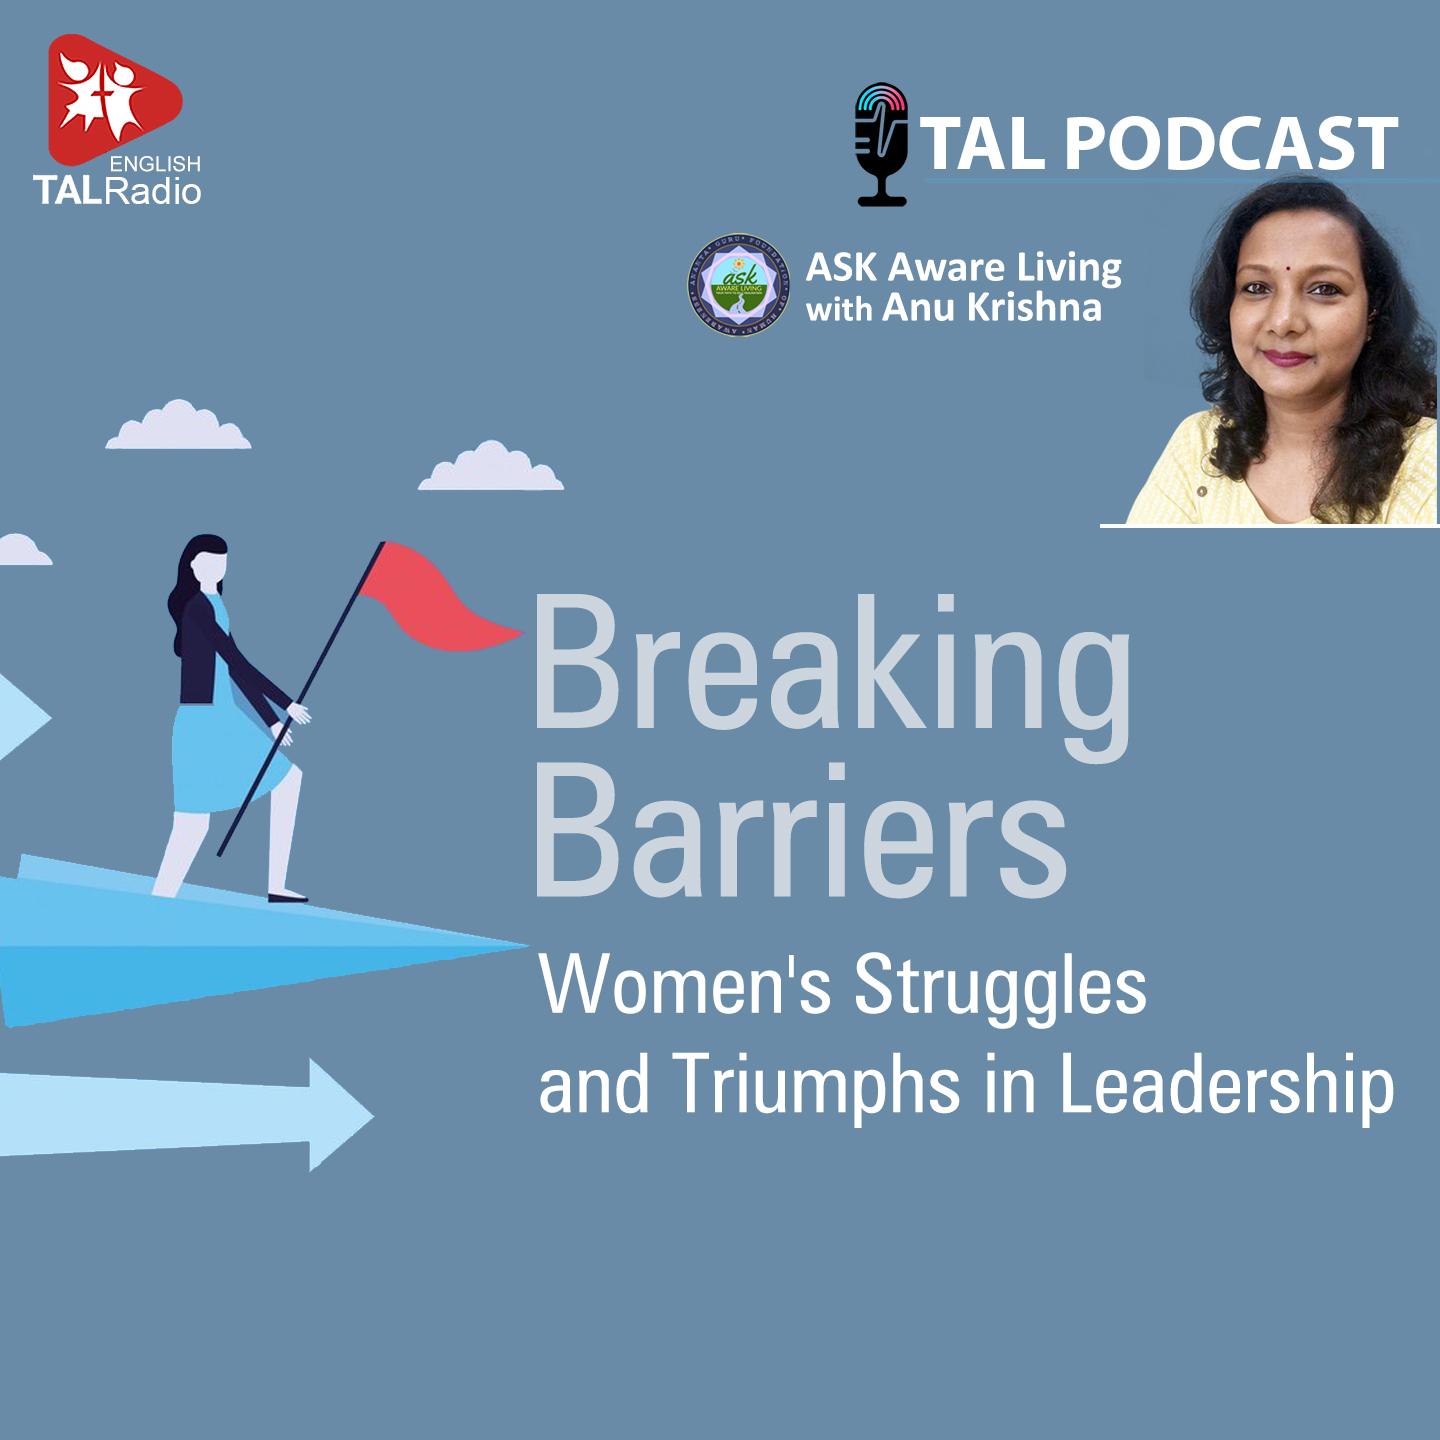 Breaking Barriers: Women's Struggles and Triumphs in Leadership | Ask Aware Living - 36